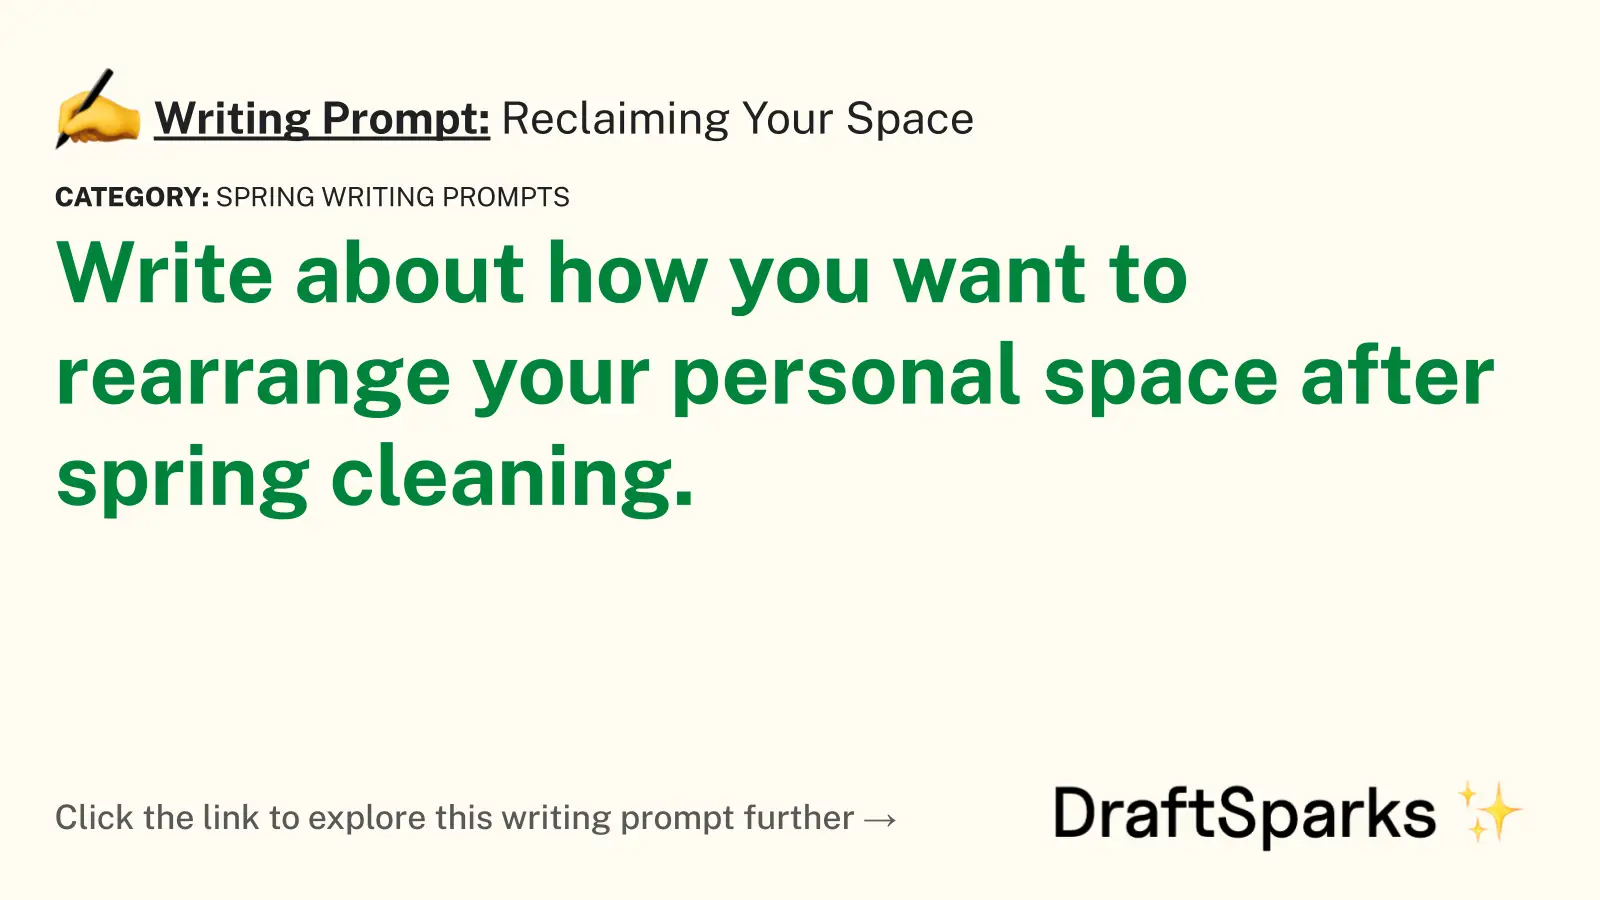 Reclaiming Your Space